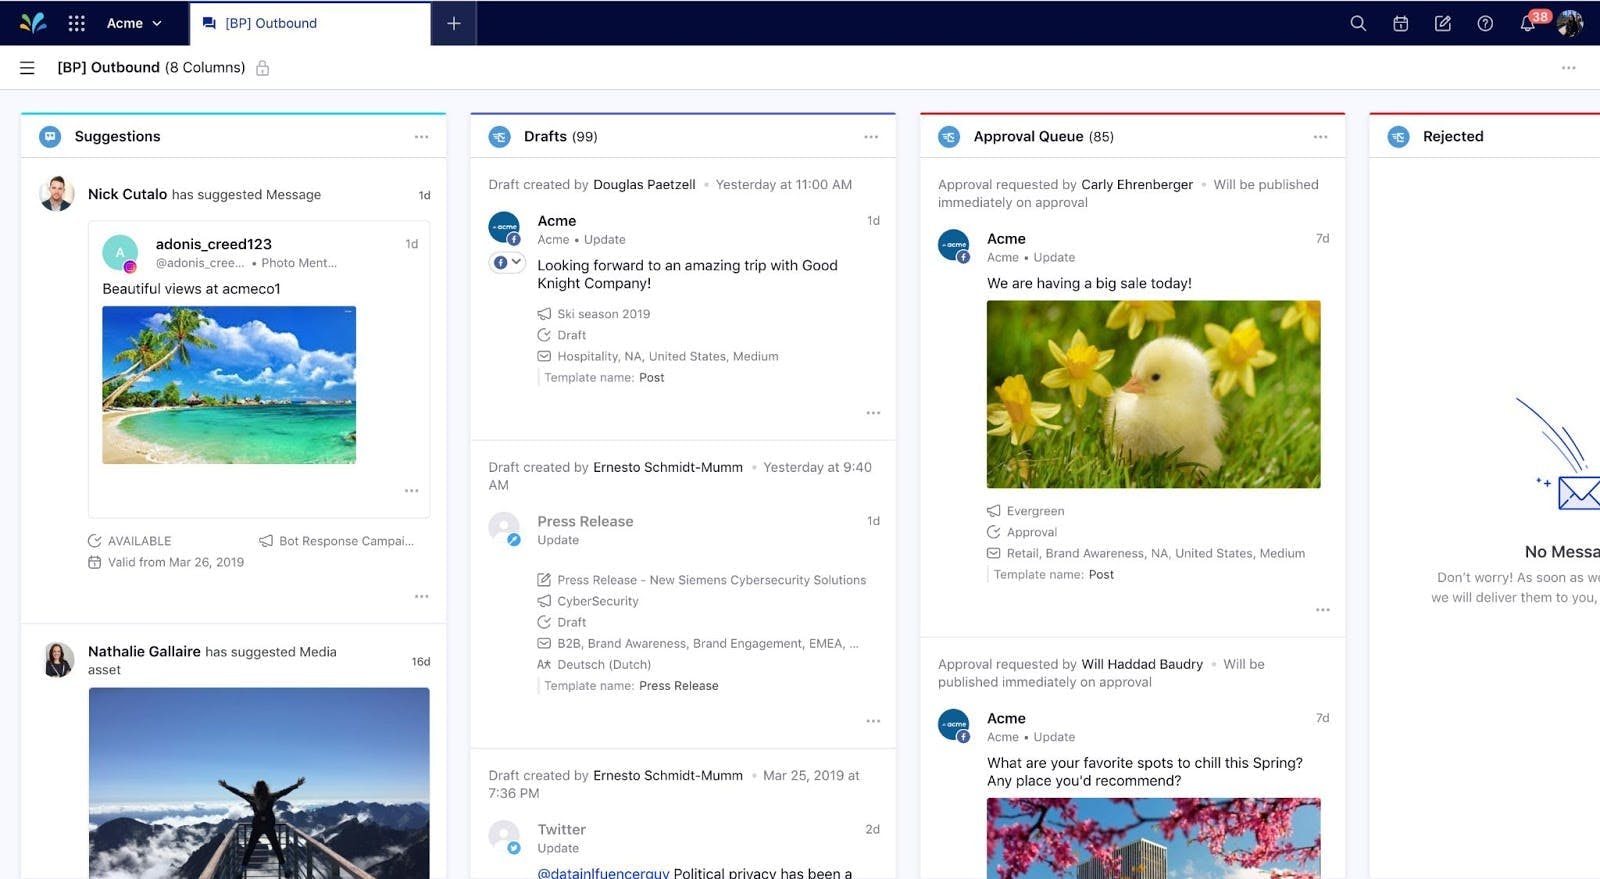 Sprinklr feed dashboard for social media monitoring showing 3 feeds